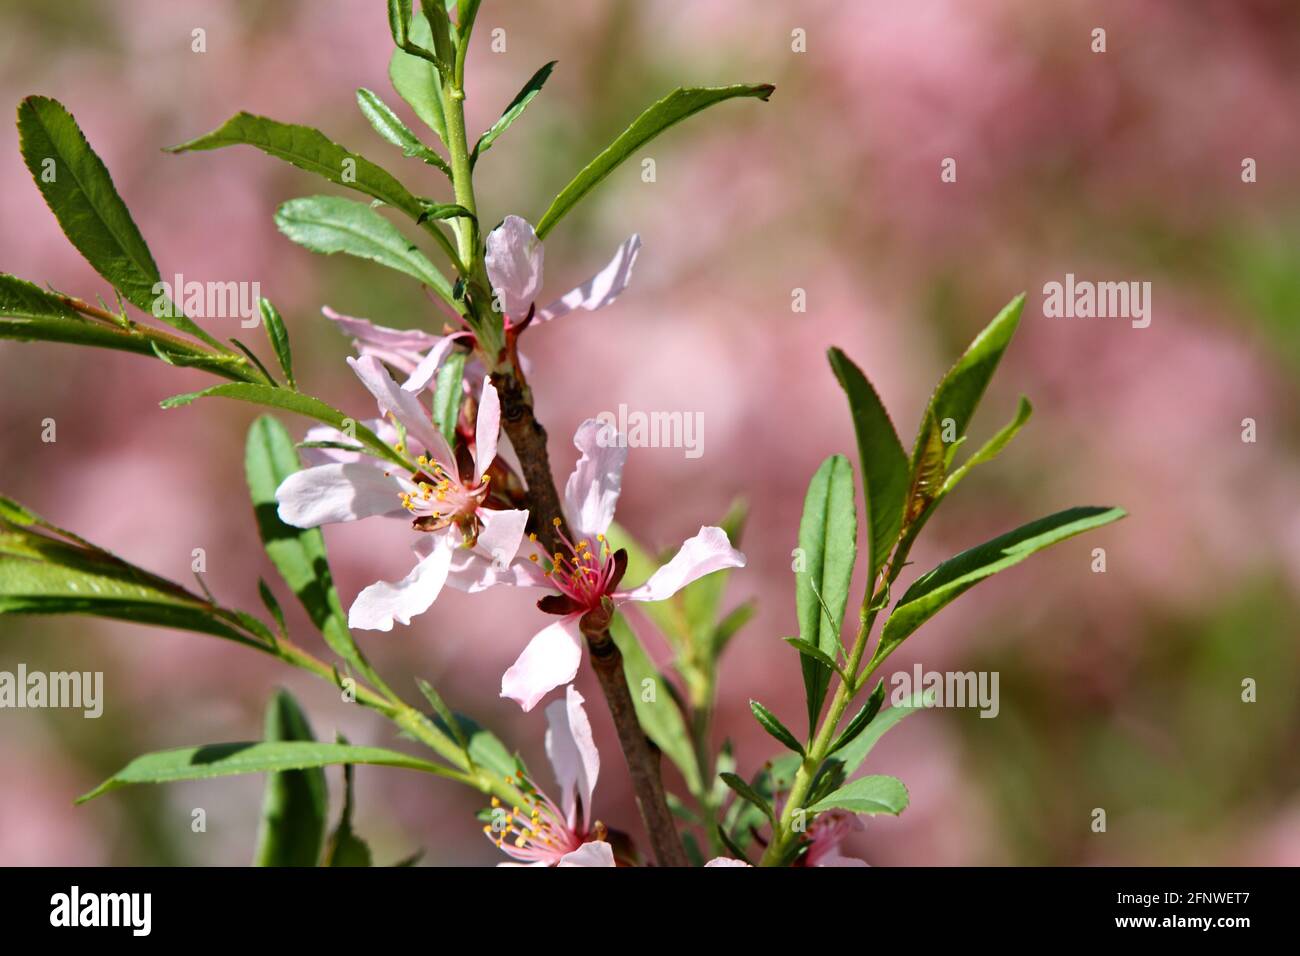 Dwarf almond blooming in garden with beautiful pink flowers Stock Photo